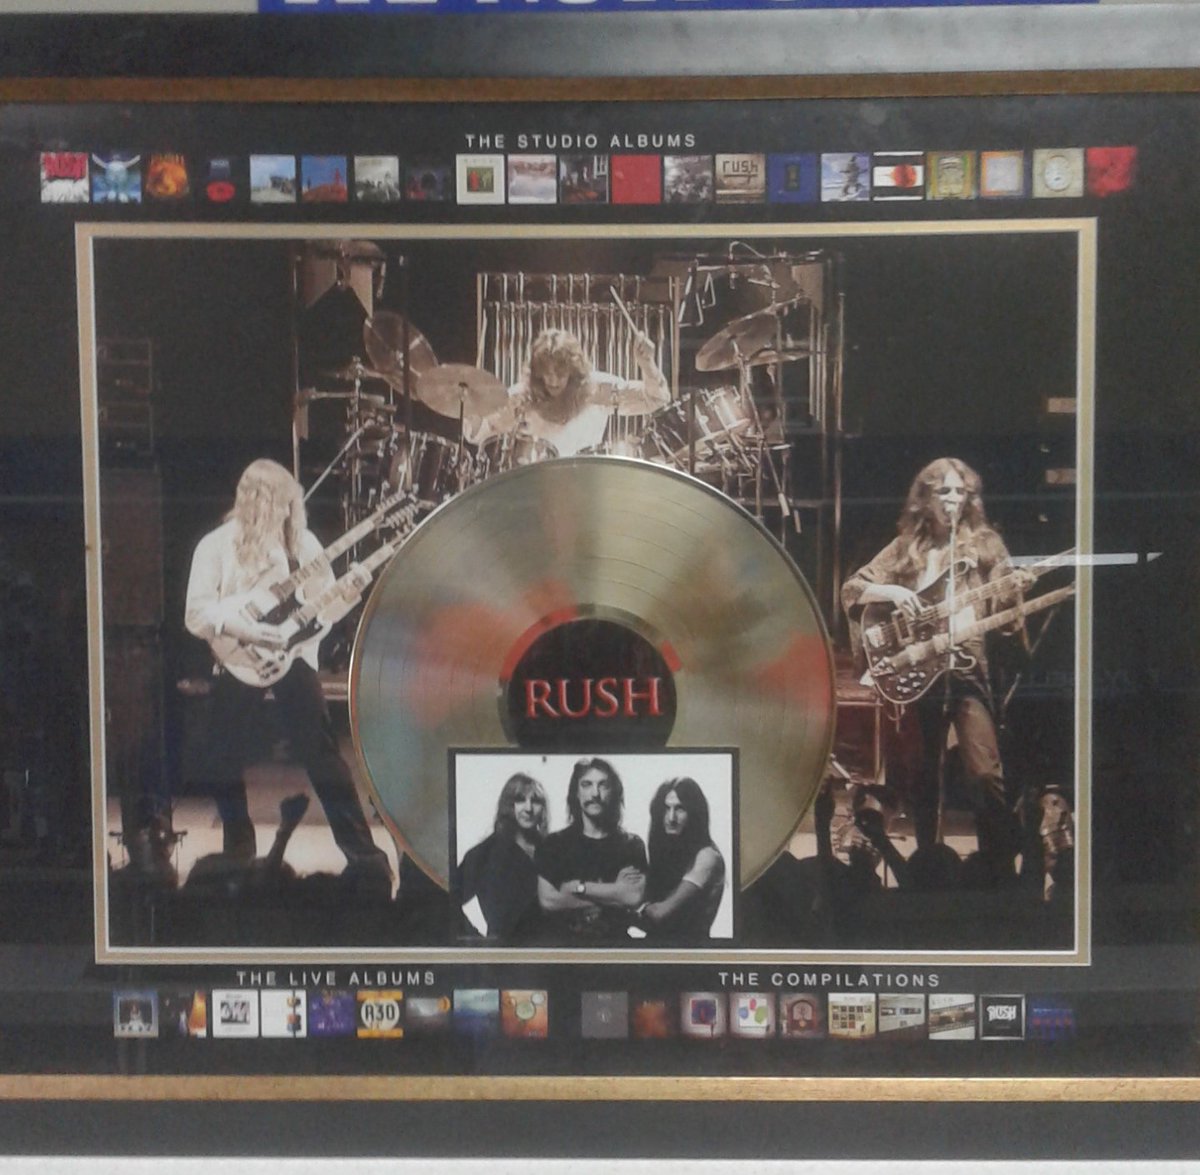 Another framed gold record available today. Rush collage for $99.99.#yyc #calgary #buyandsell #buylocal #rush #GOLD